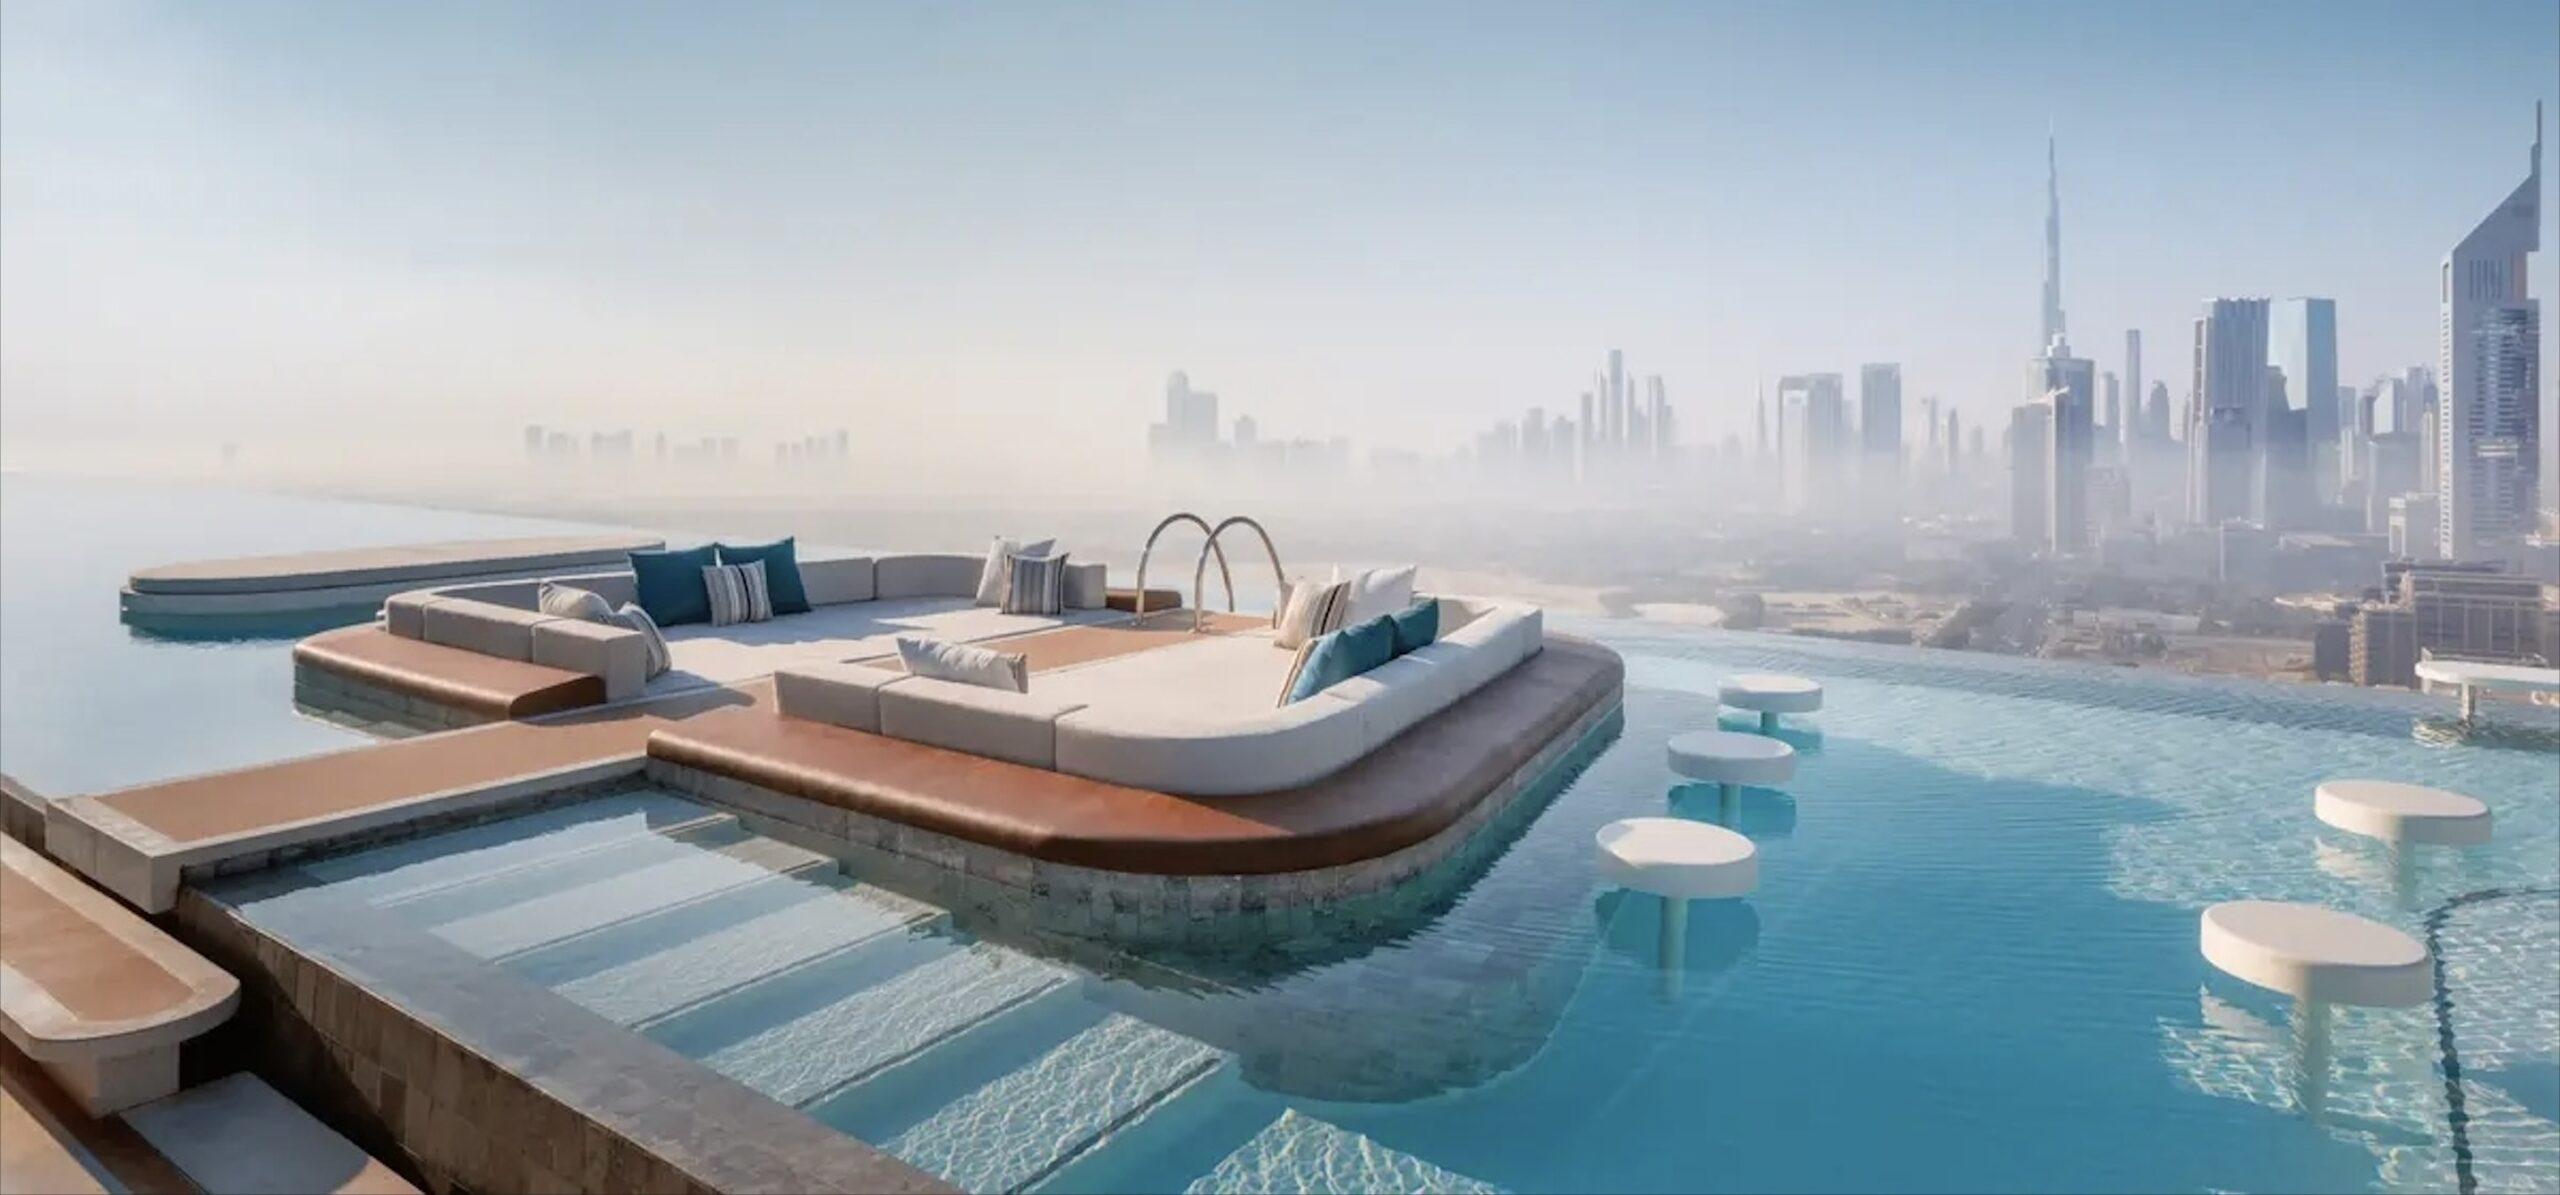 Tapasake Review: Dive into the UAE’s longest suspended infinity pool